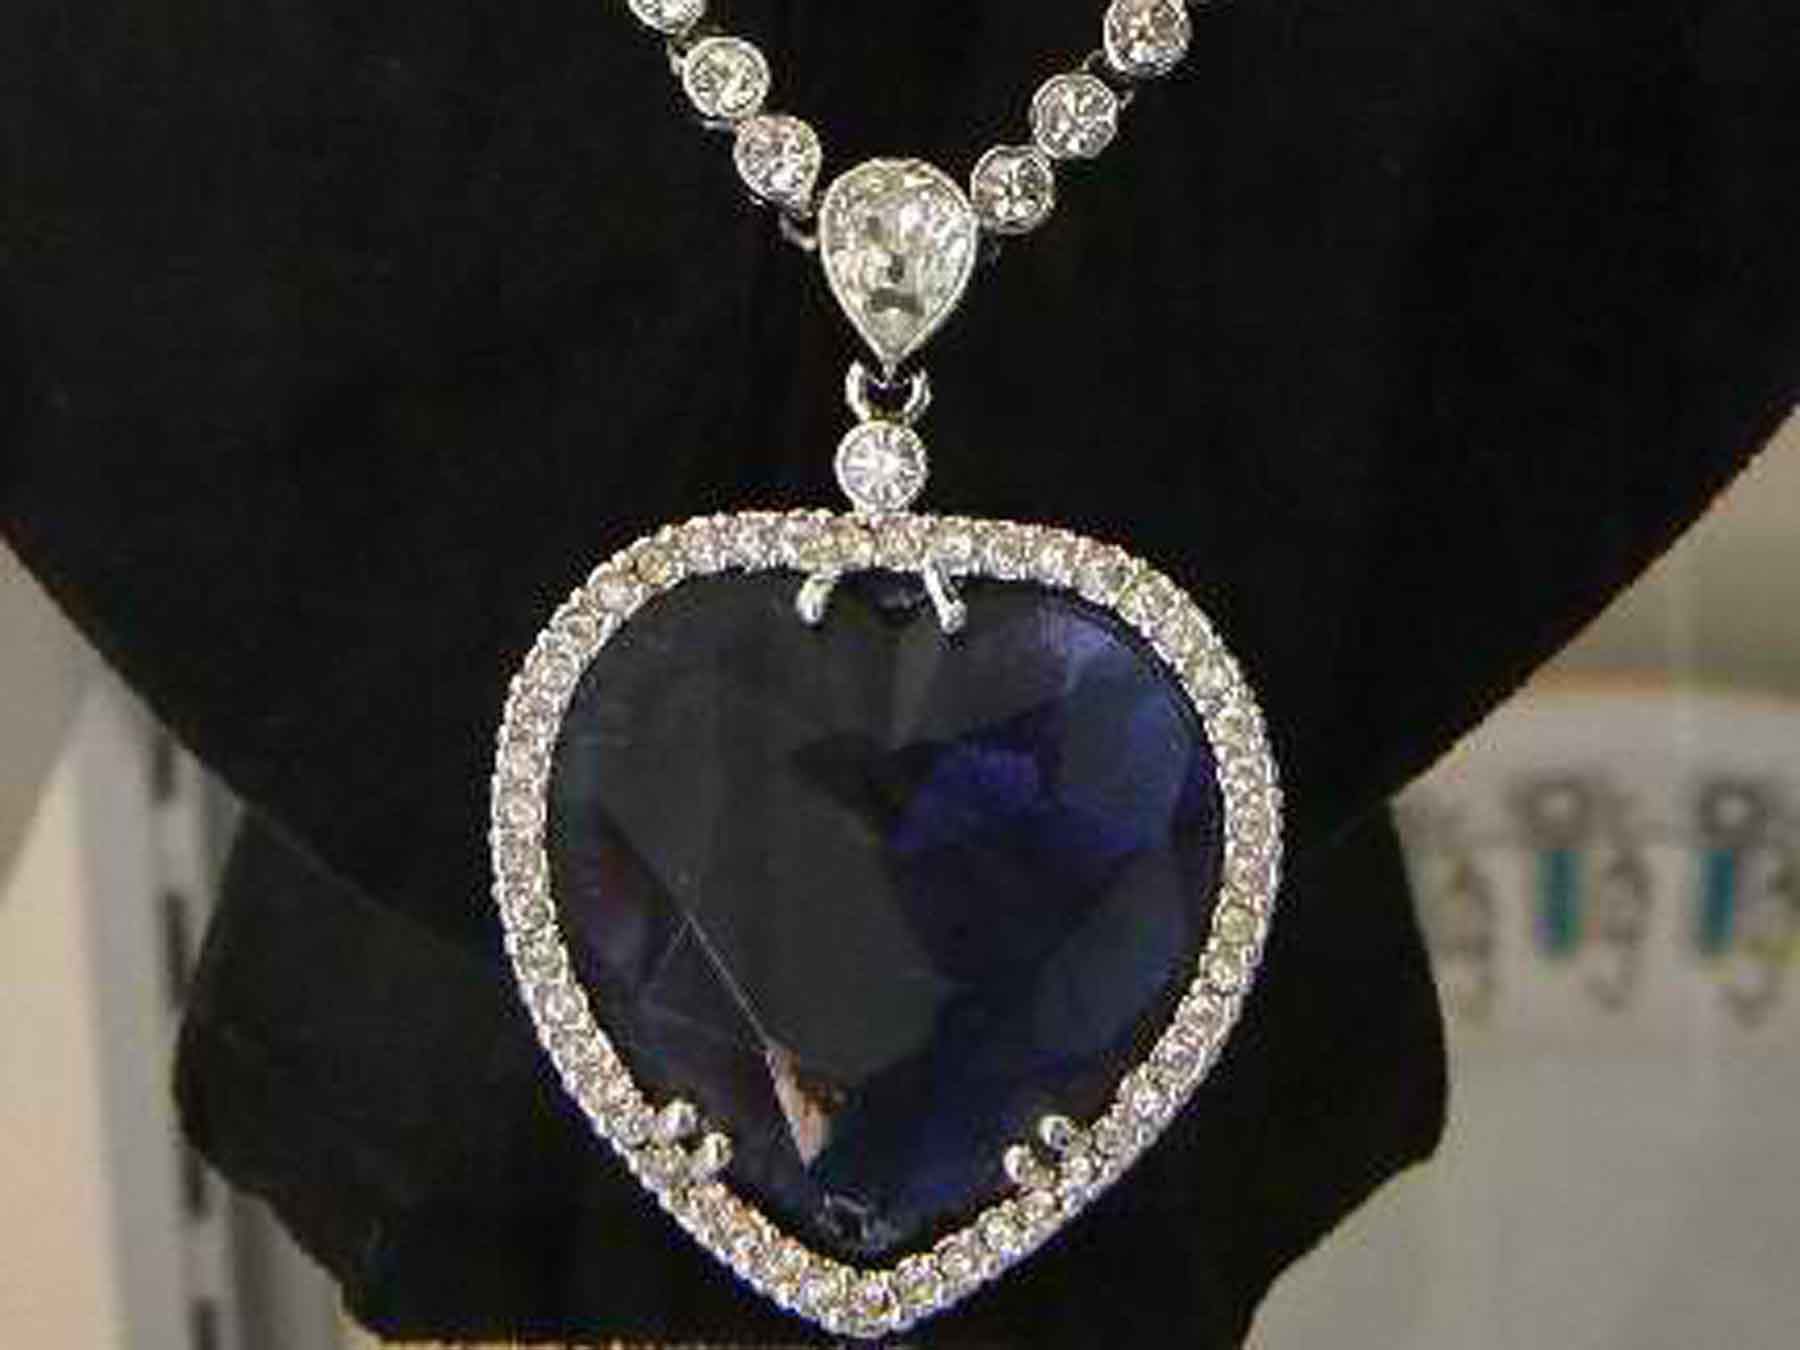 Famous Fictional Jewellery - Heart of the Ocean